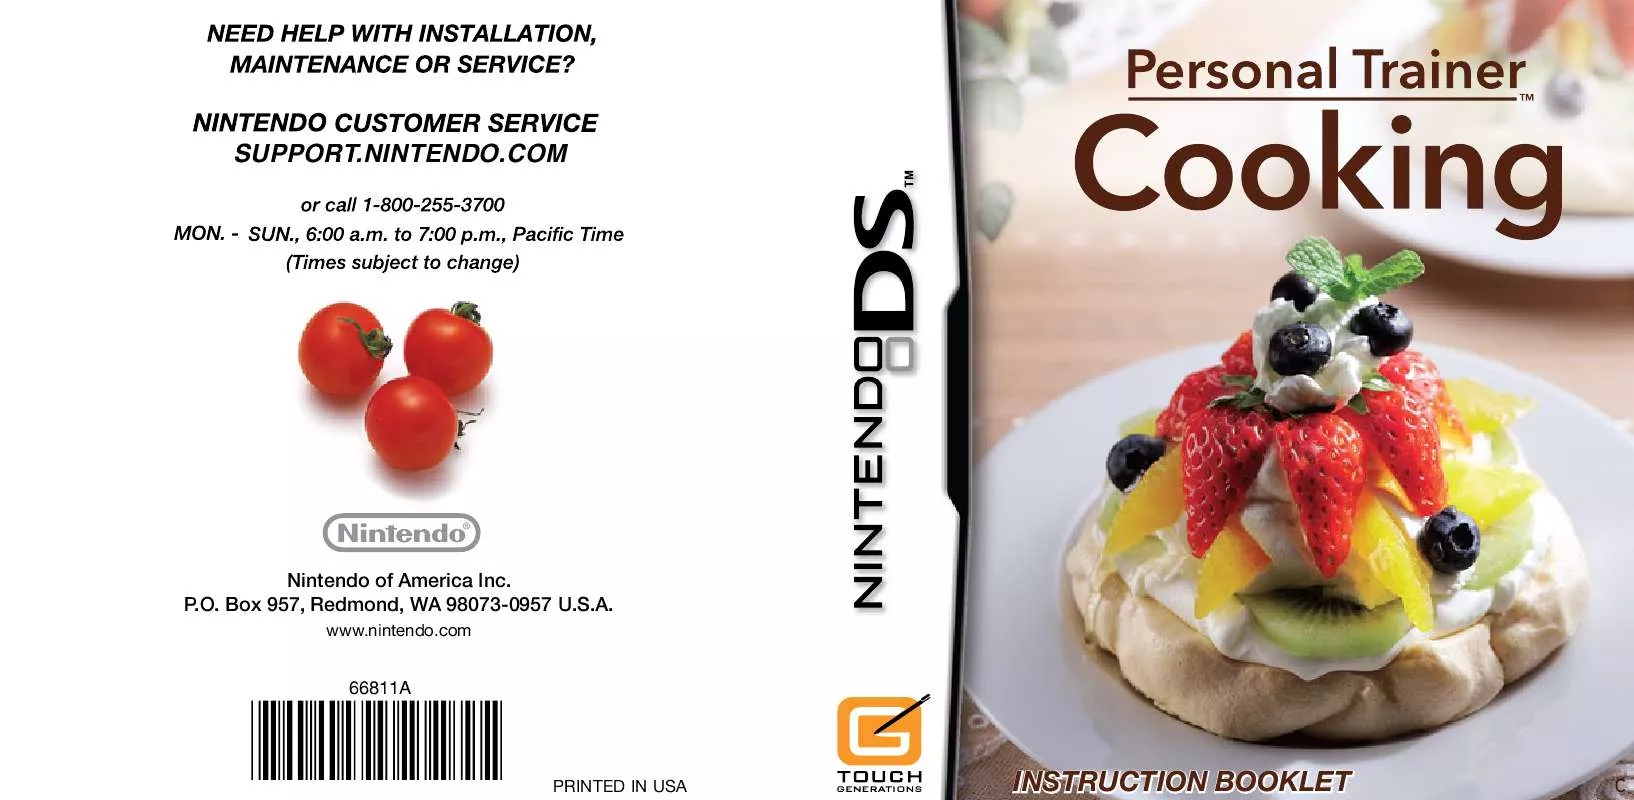 Mode d'emploi NINTENDO PERSONAL TRAINER: COOKING